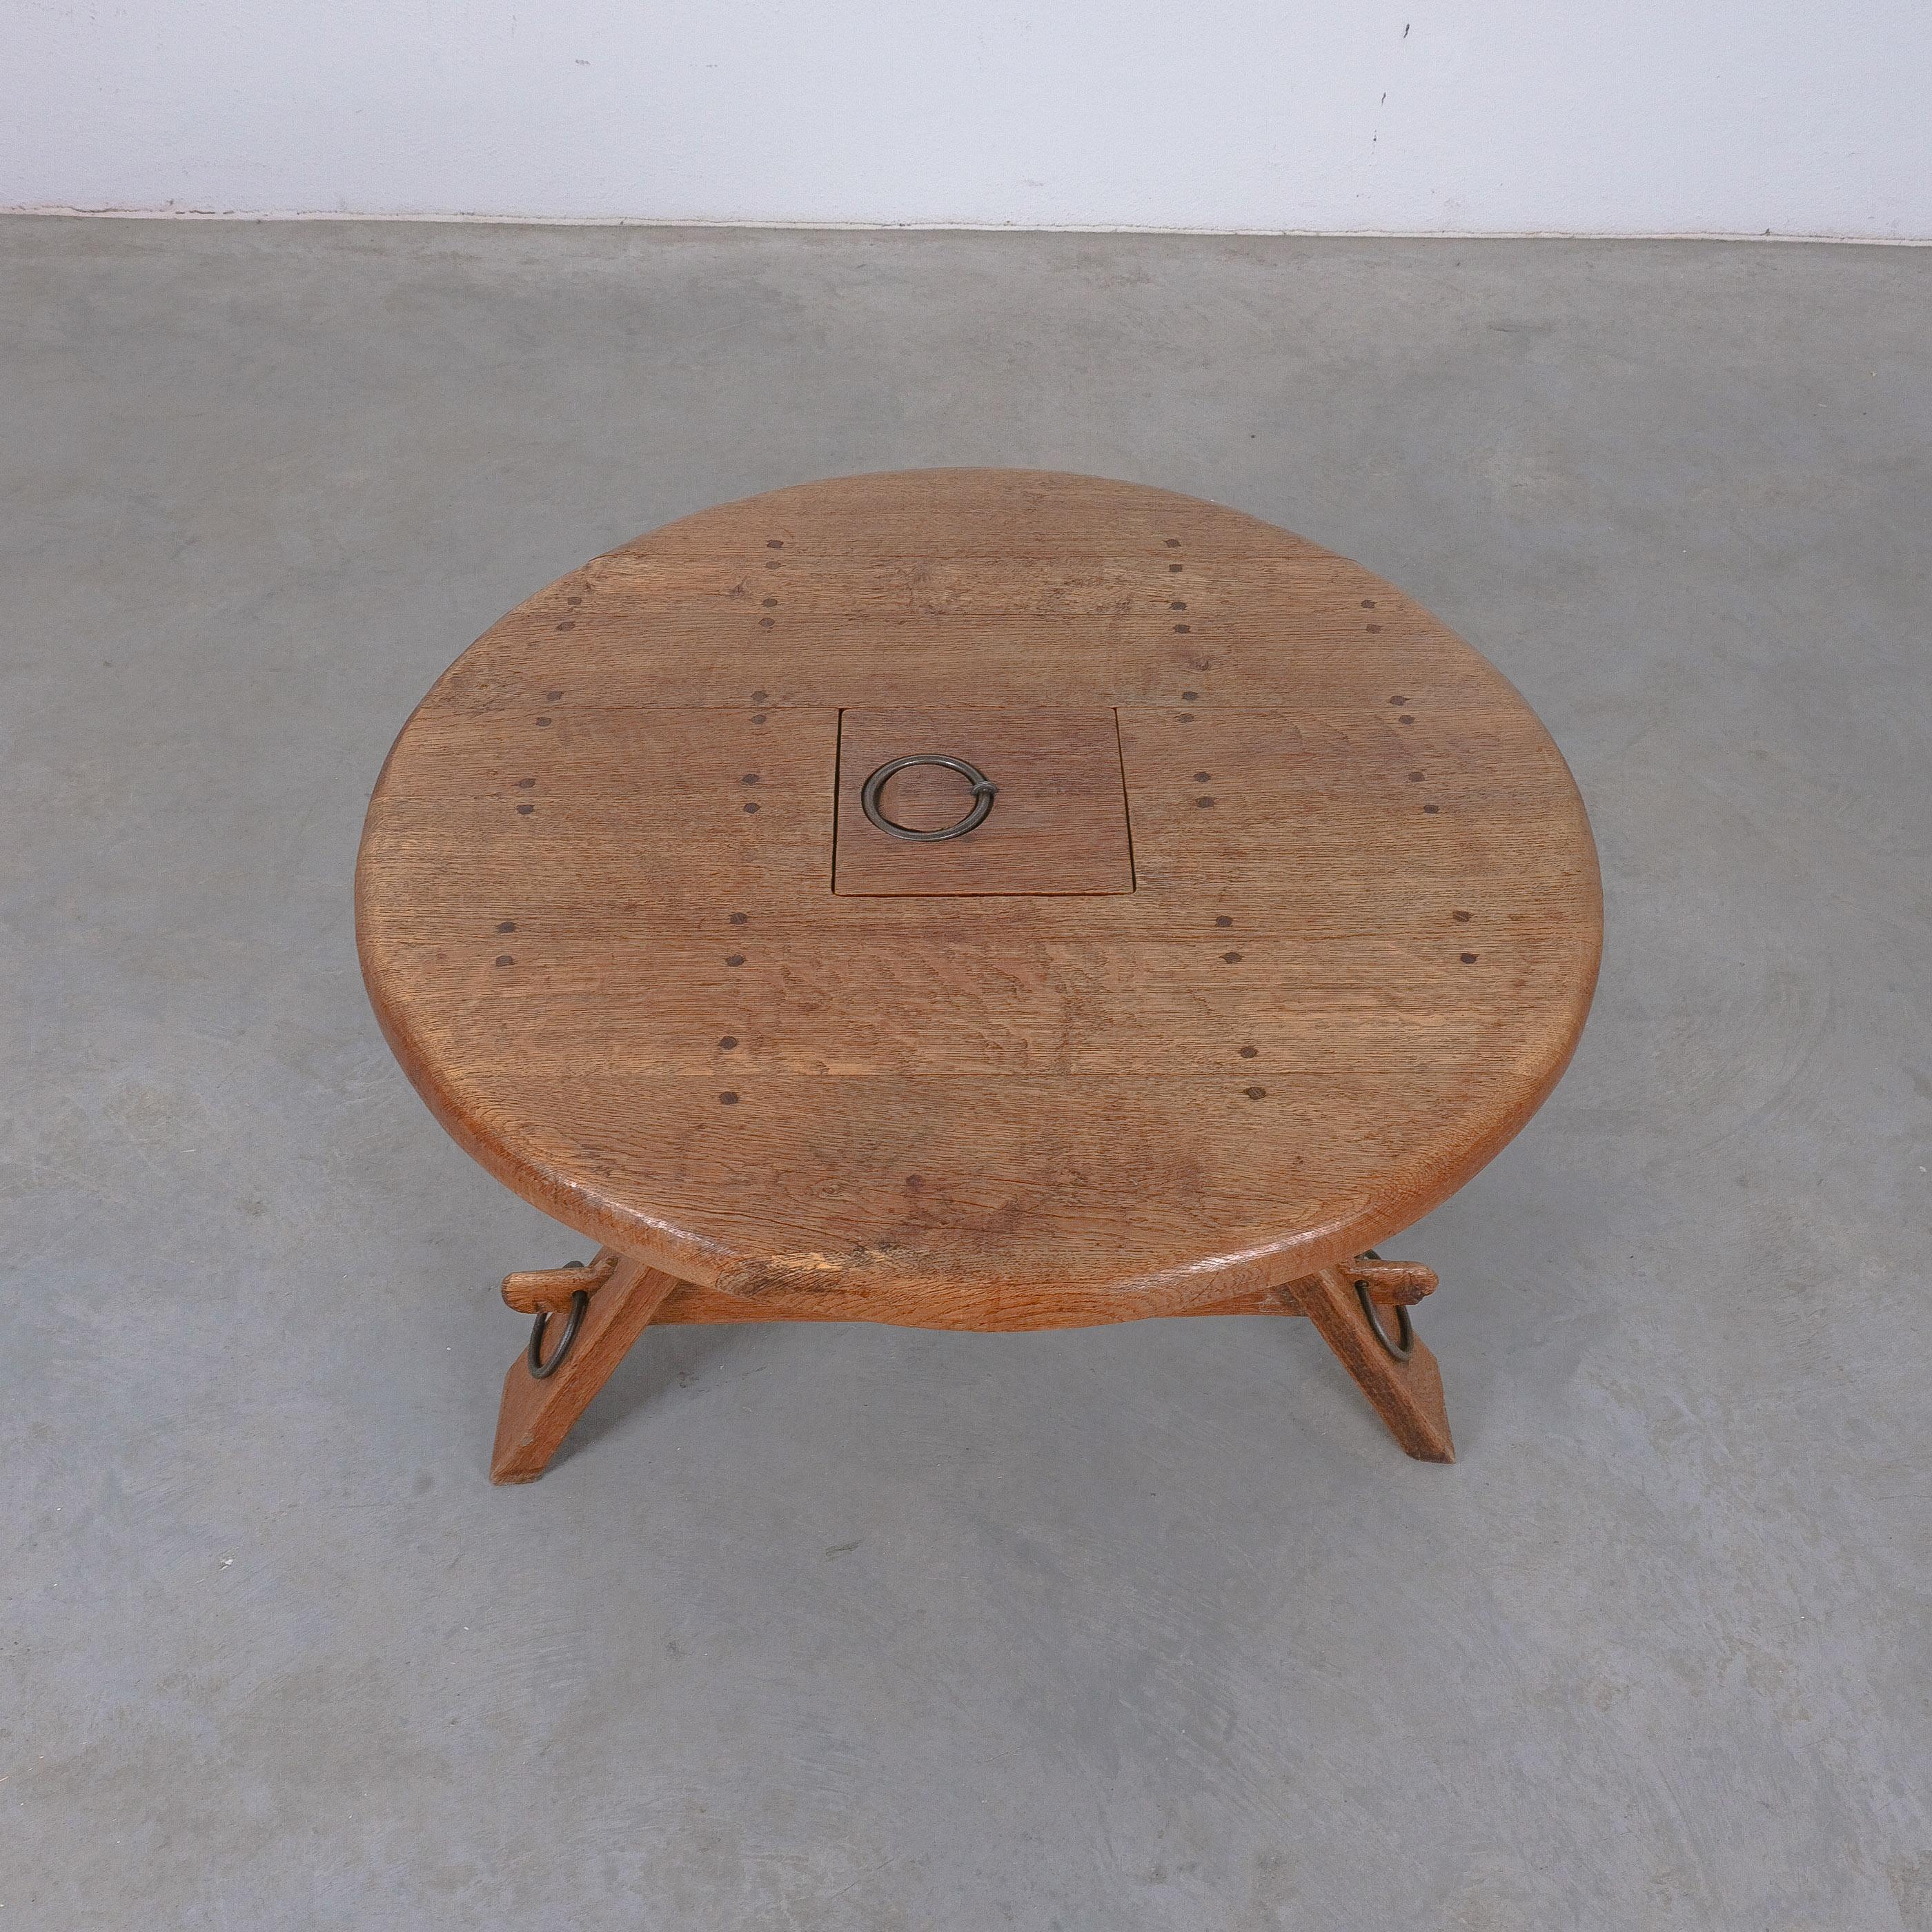 Brutalist Oak Coffee Table Carved Wood Artisan with Iron Details, France, 1950 For Sale 1